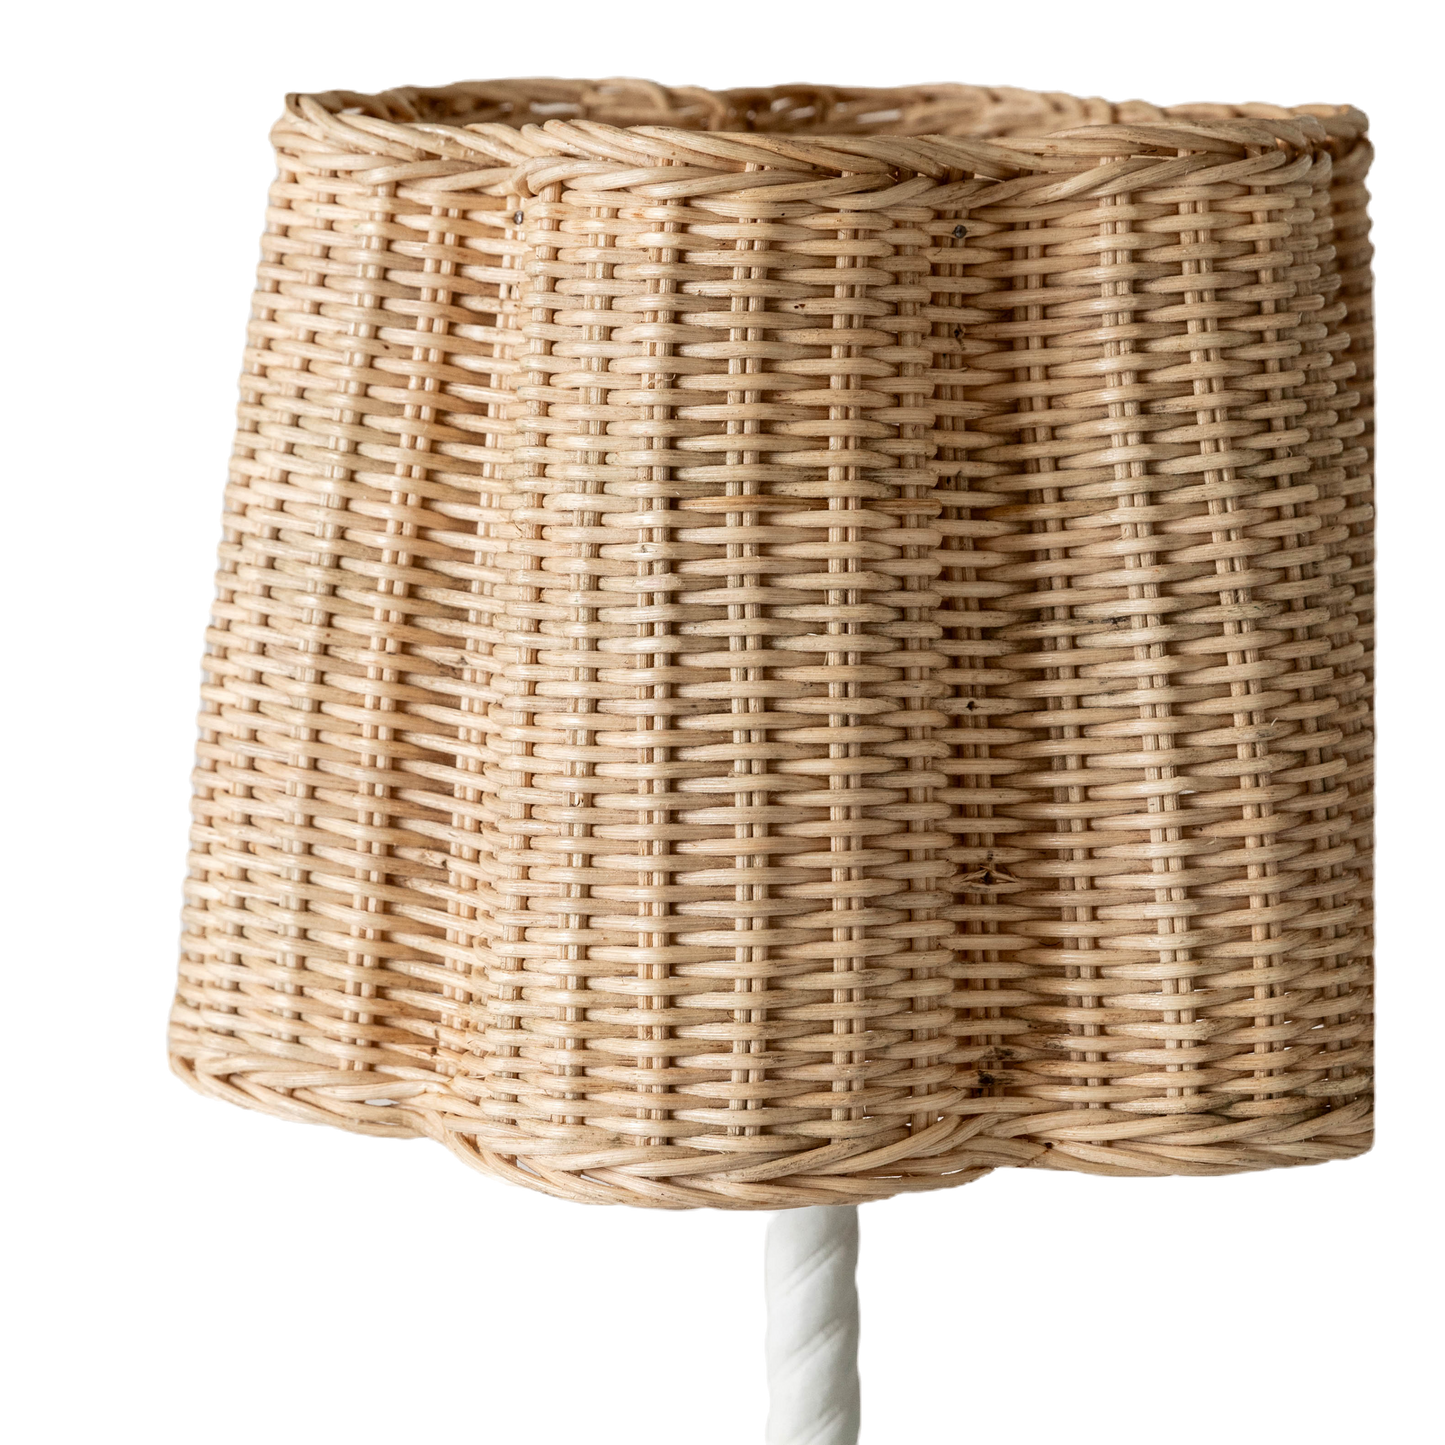 Hastshilp Clover Lampshade in Natural